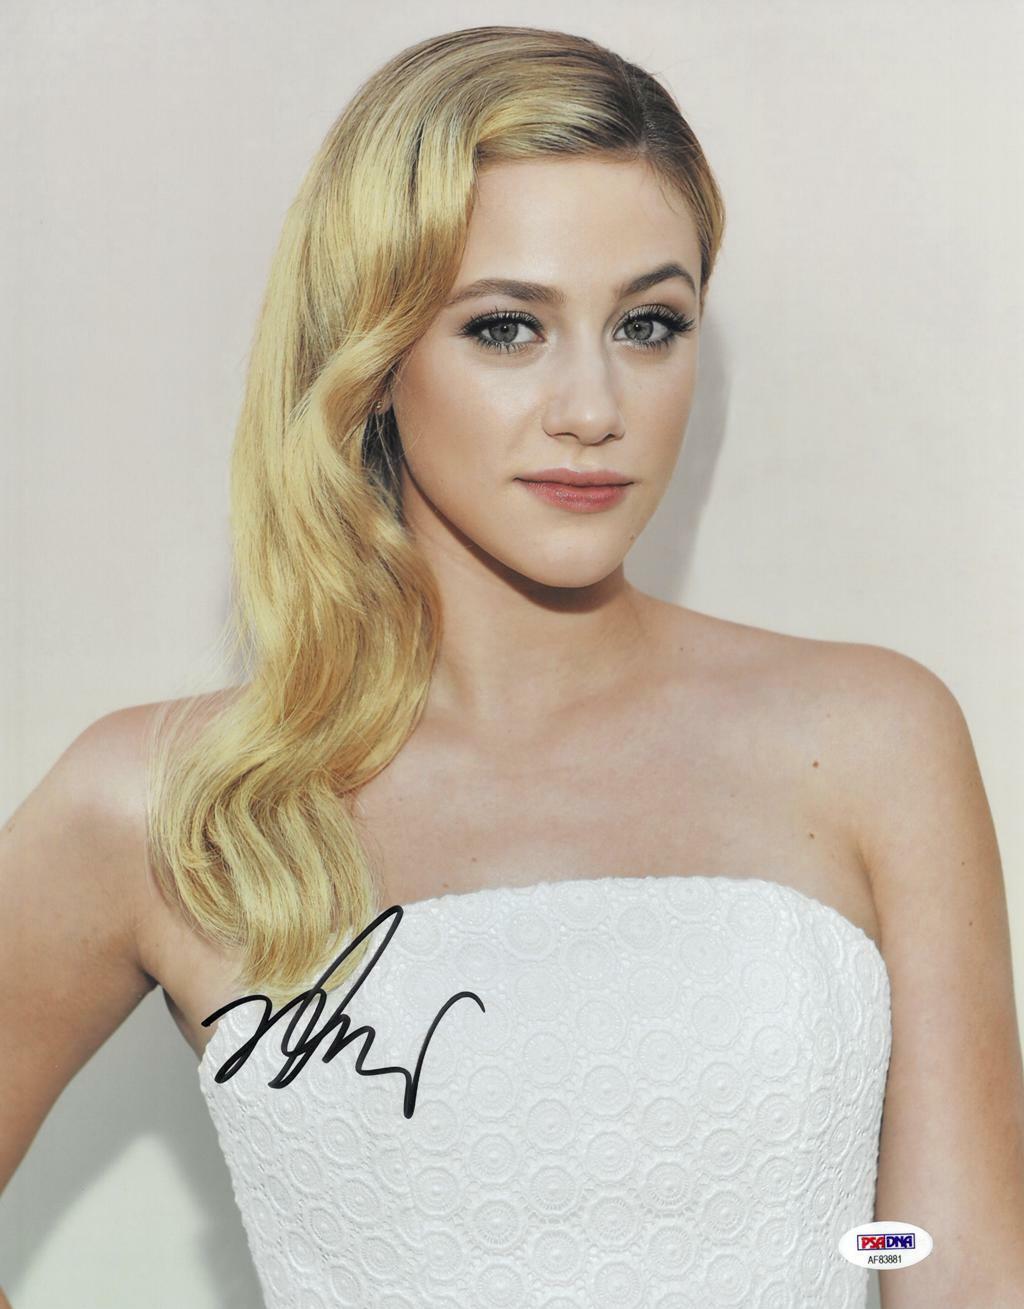 Lili Reinhard Signed Authentic Autographed 11x14 Photo Poster painting PSA/DNA #AF83881